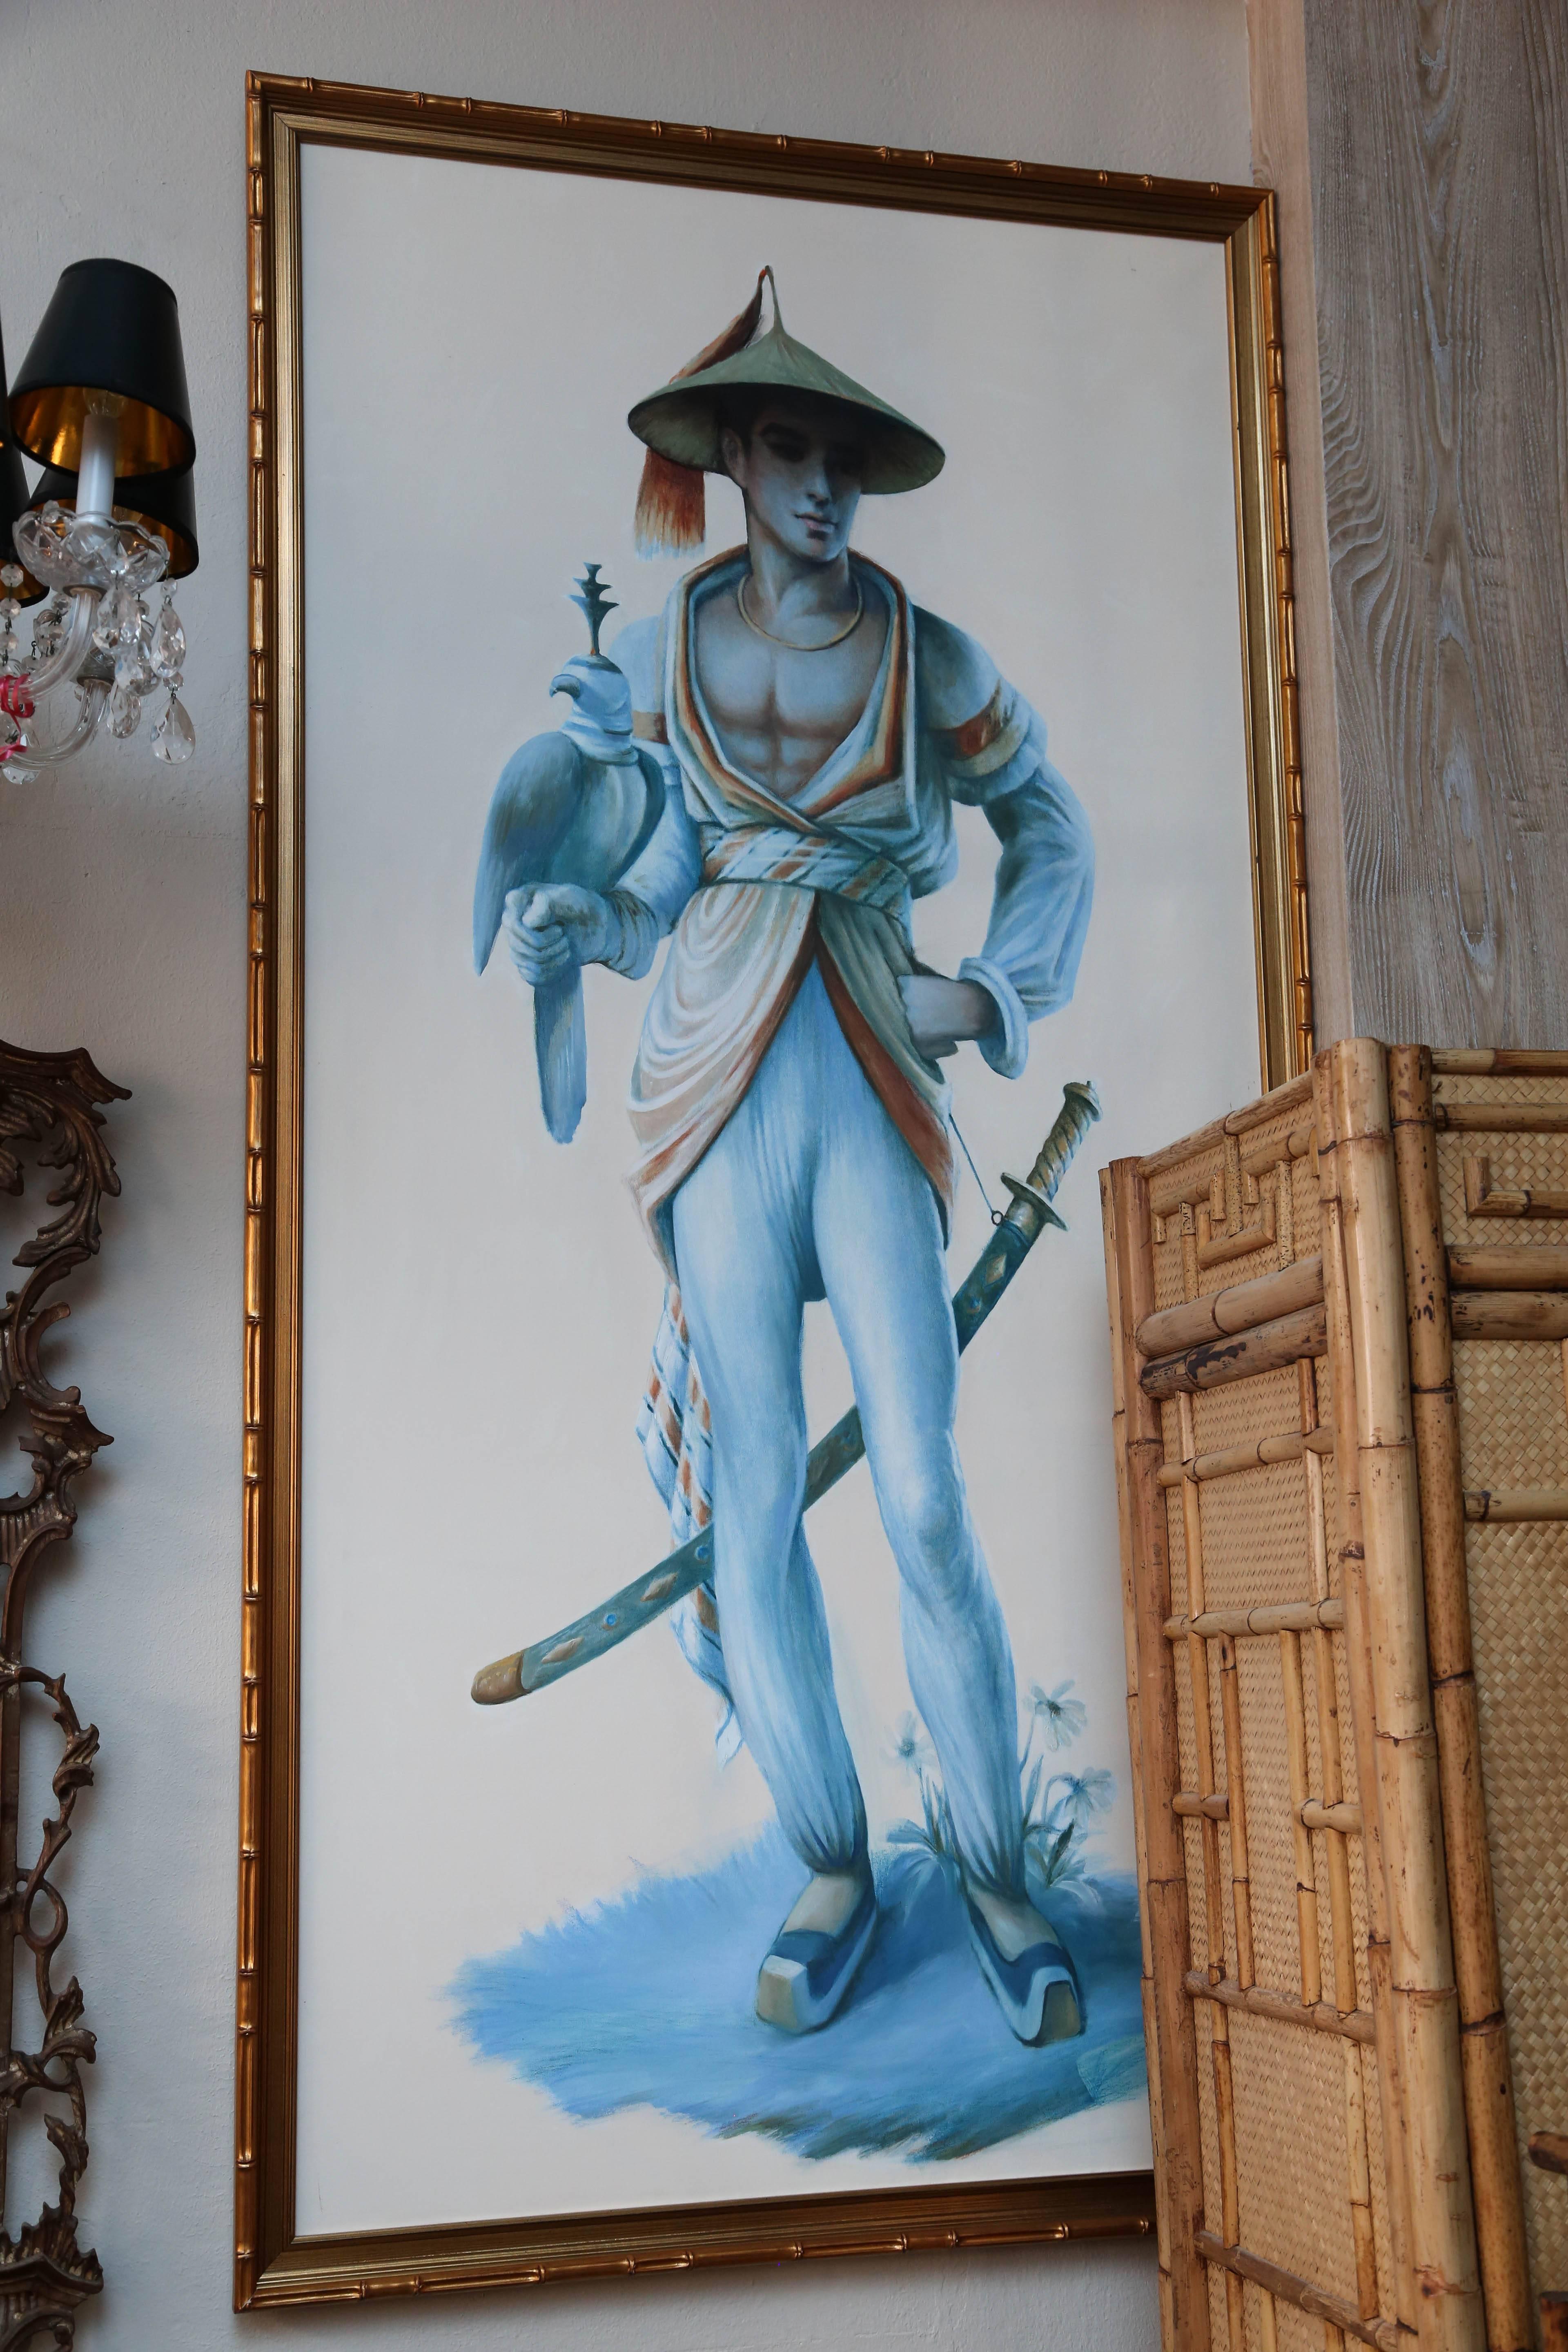 Brilliantly painted chinoiserie pair of murals from an iconic Palm Beach mansion. These are opposing figures - not mirror images - note different faces and slightly different builds. 
A brilliantly imaginative and fantastic pair in giltwood faux